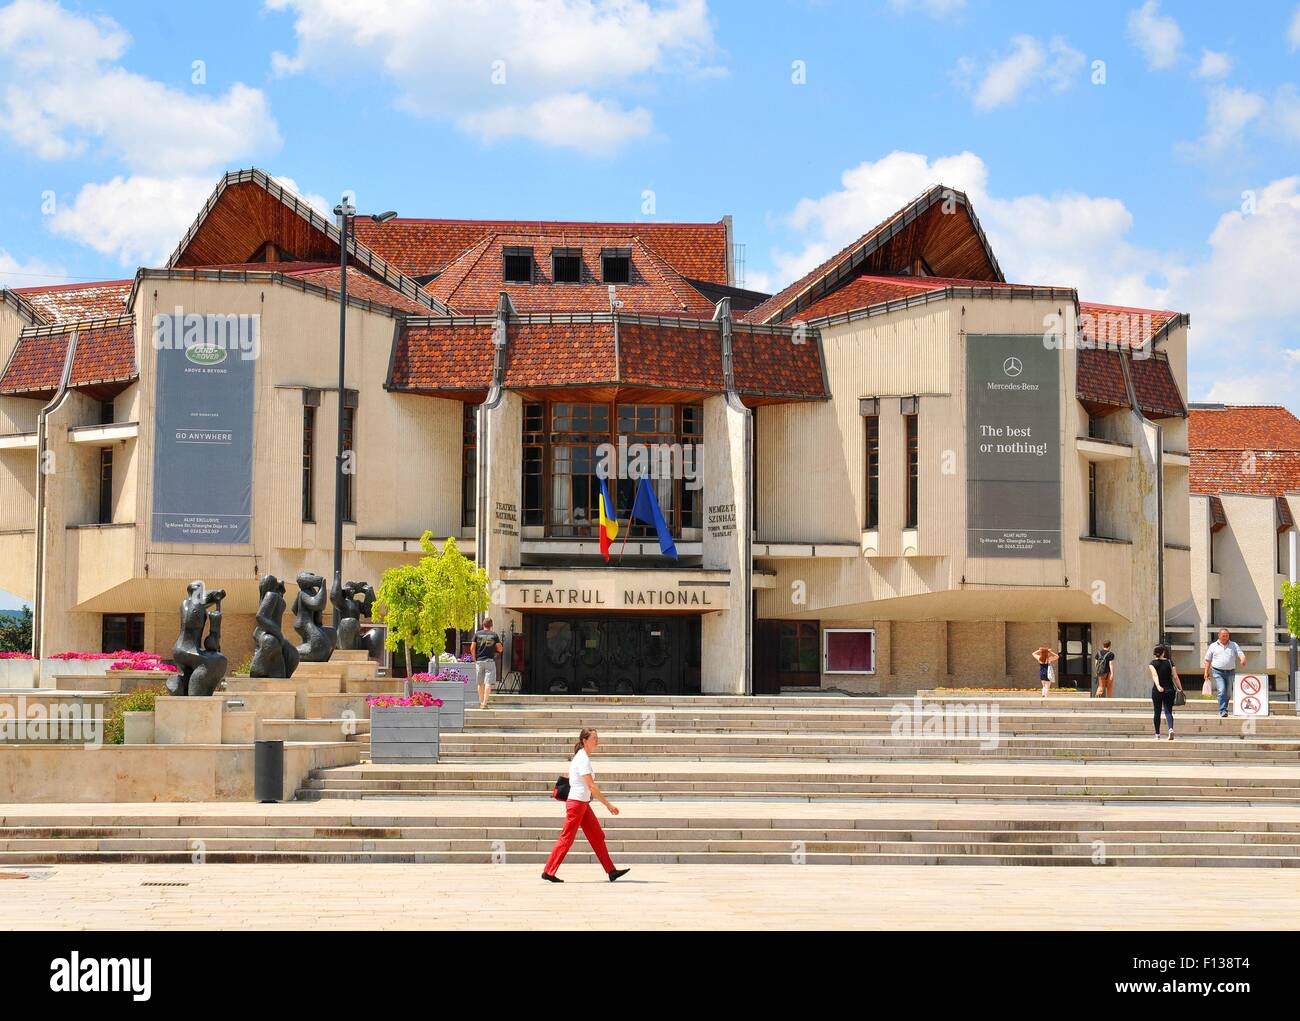 Targu Mures, Romania - July 2, 2015: View of modern architecture of the National Theatre in Targu Mures Stock Photo